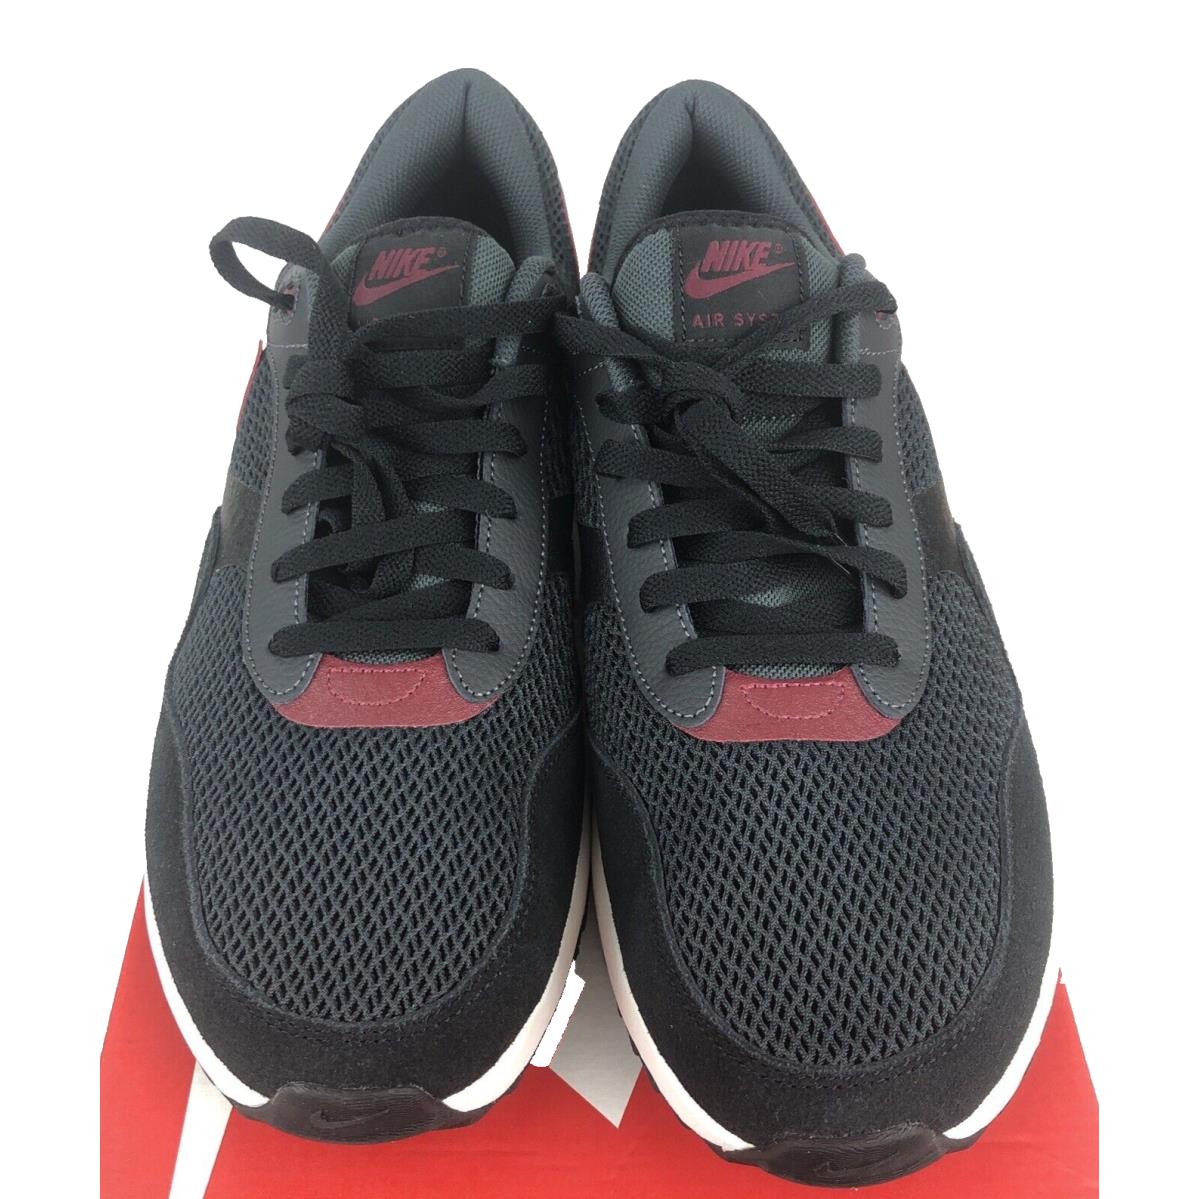 Nike shoes Air Max System - Black Red White 2